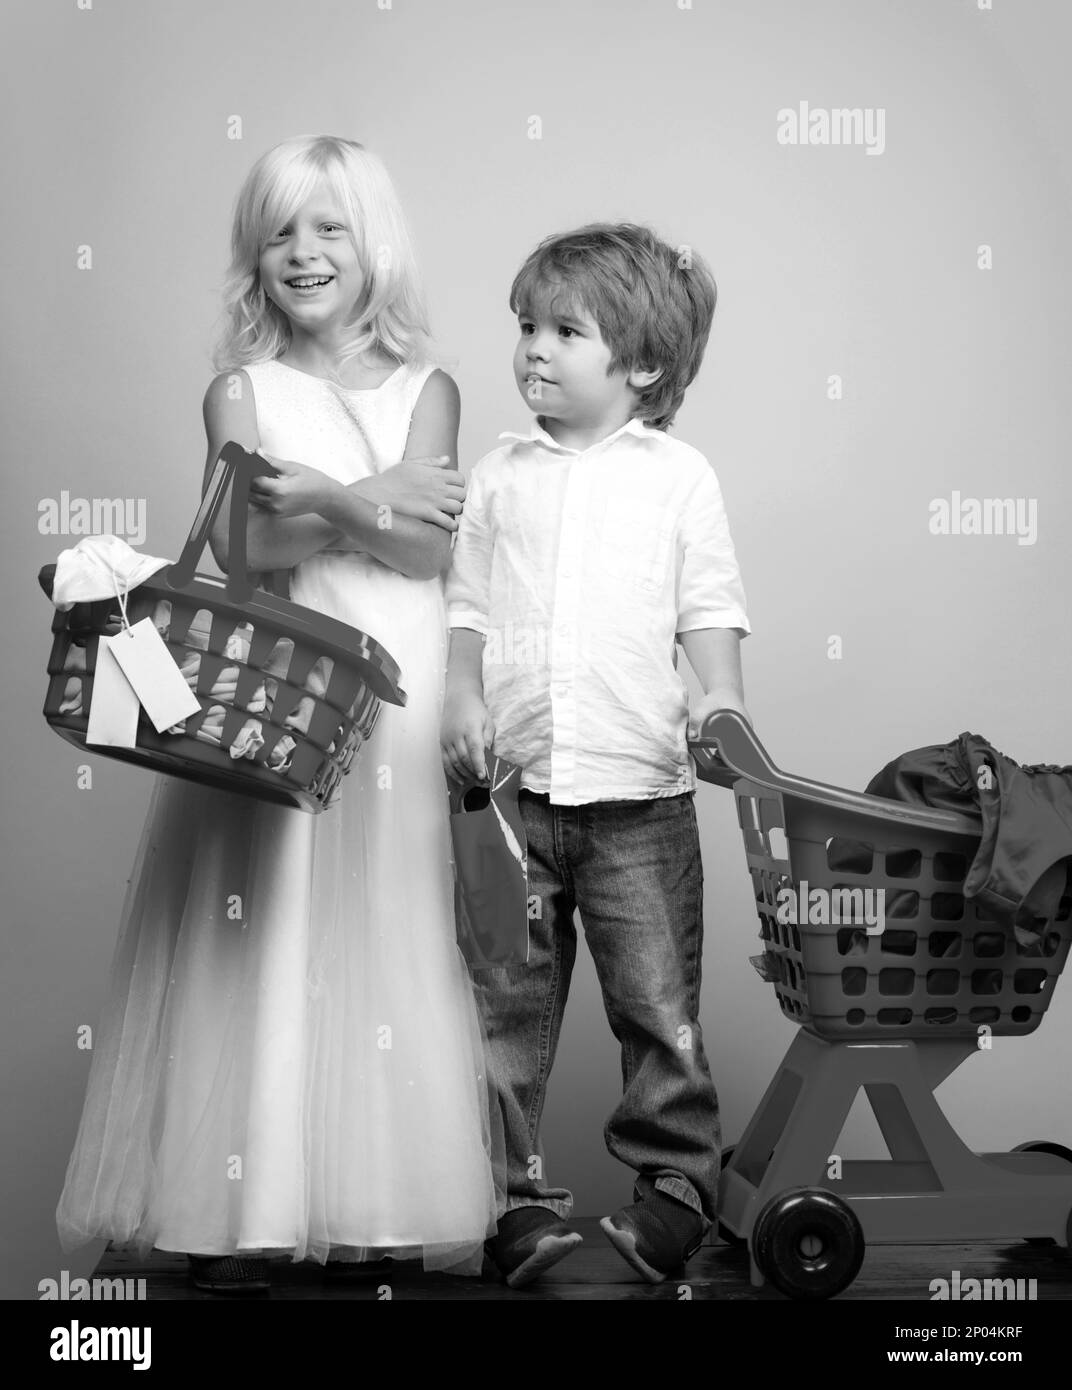 Girl and boy children shopping. Couple kids hold plastic shopping basket toy. Kids store. Mall shopping. Buy products. Play shop game. Cute buyer Stock Photo